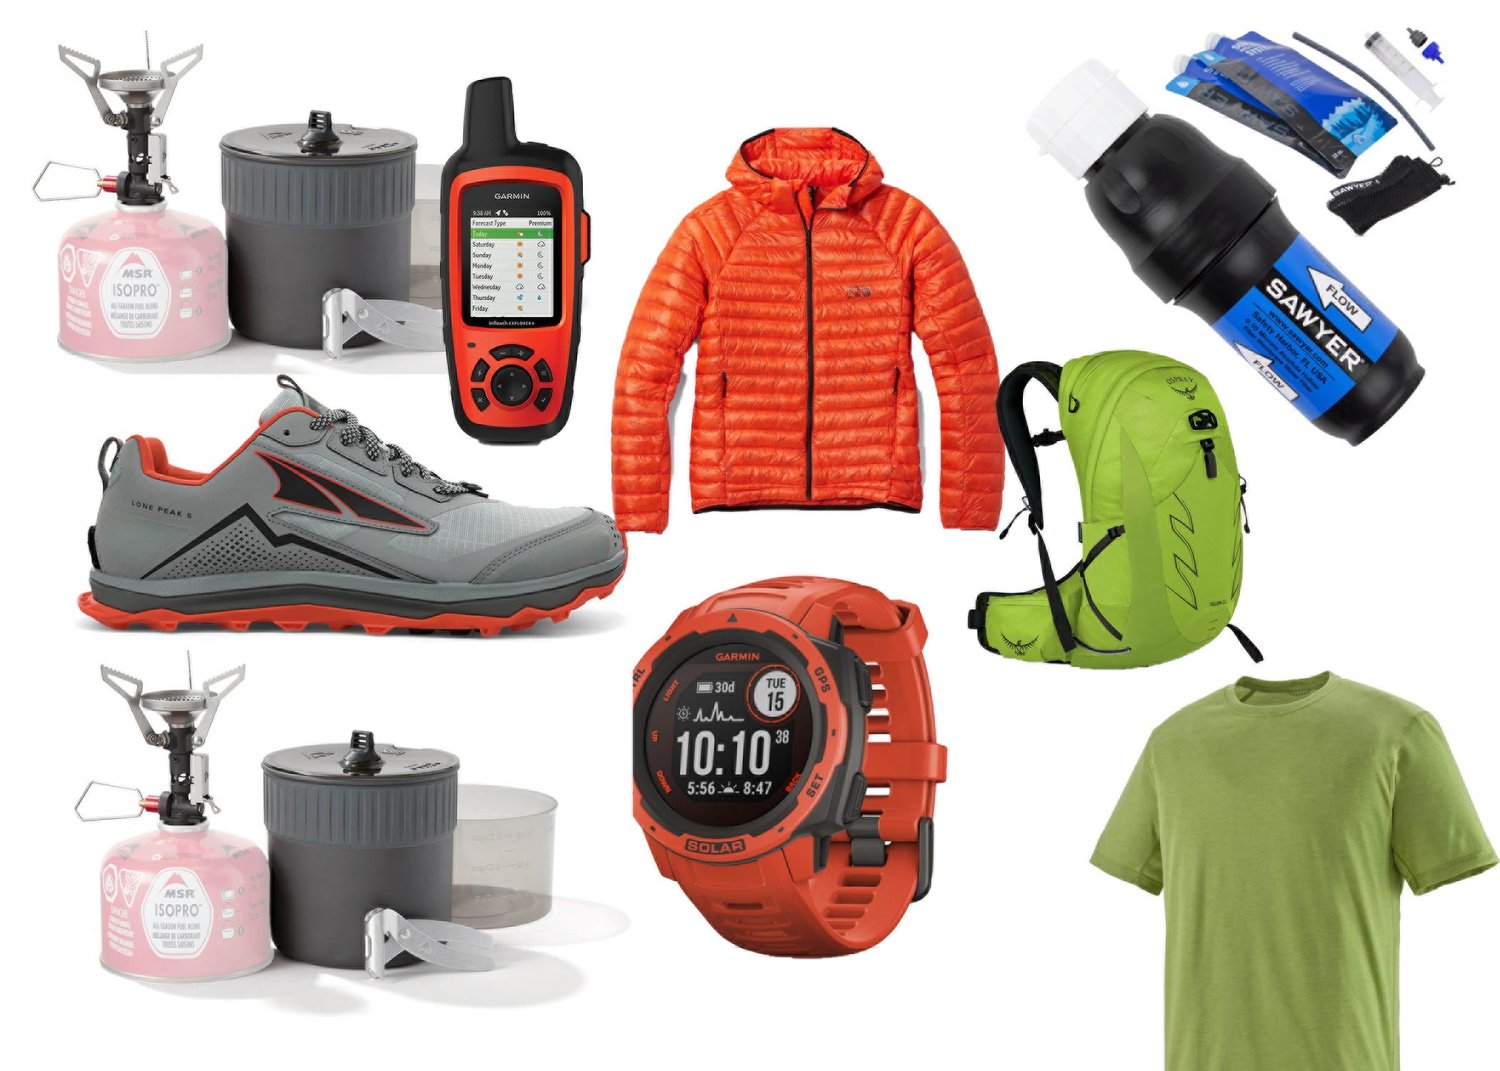 Outdoor Gear Guide - Our Favorite Hiking and Camping Gear — The